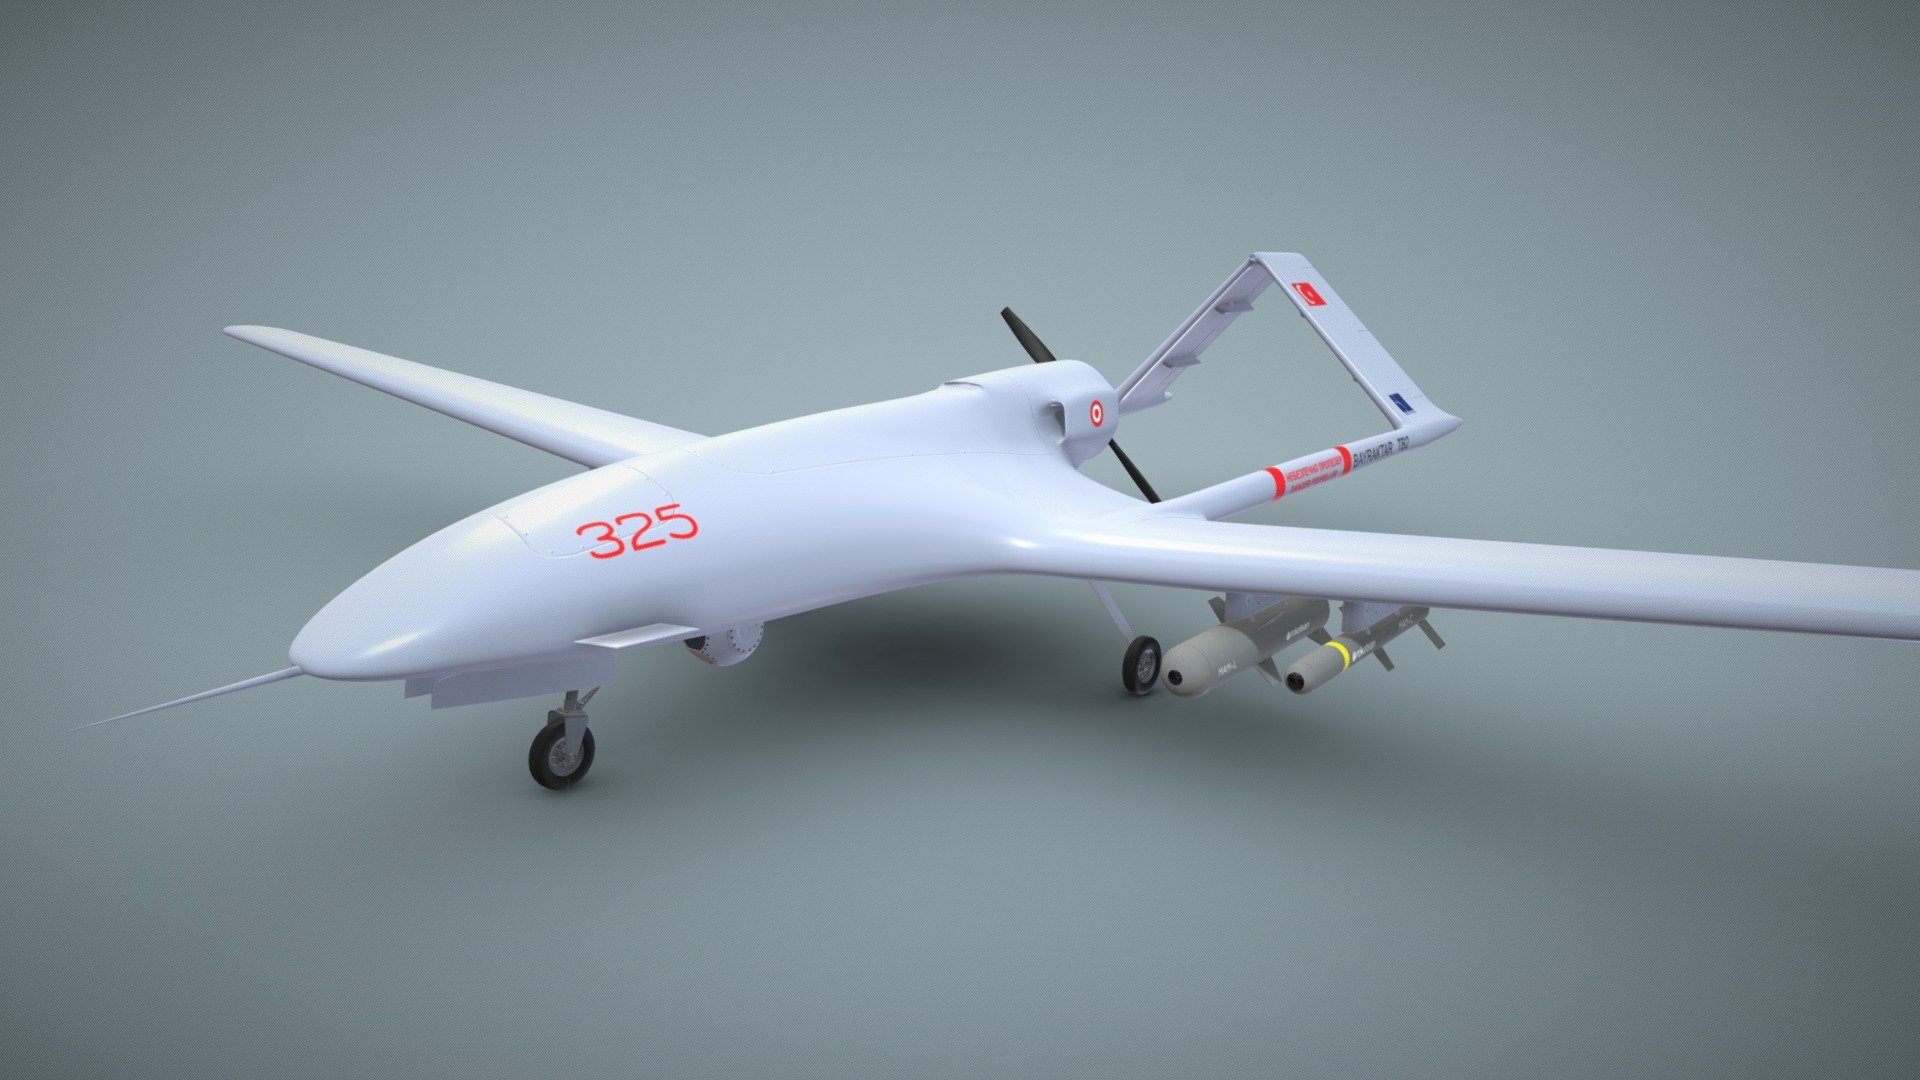 The Bayraktar TB2 is a medium-altitude long-endurance unmanned combat aerial vehicle capable of remotely controlled or autonomous flight operations The aircraft are monitored and controlled by an aircrew in a ground control station, including weapons employment - Baykar Bayraktar TB2 - Buy Royalty Free 3D model by luisbcompany 3d model